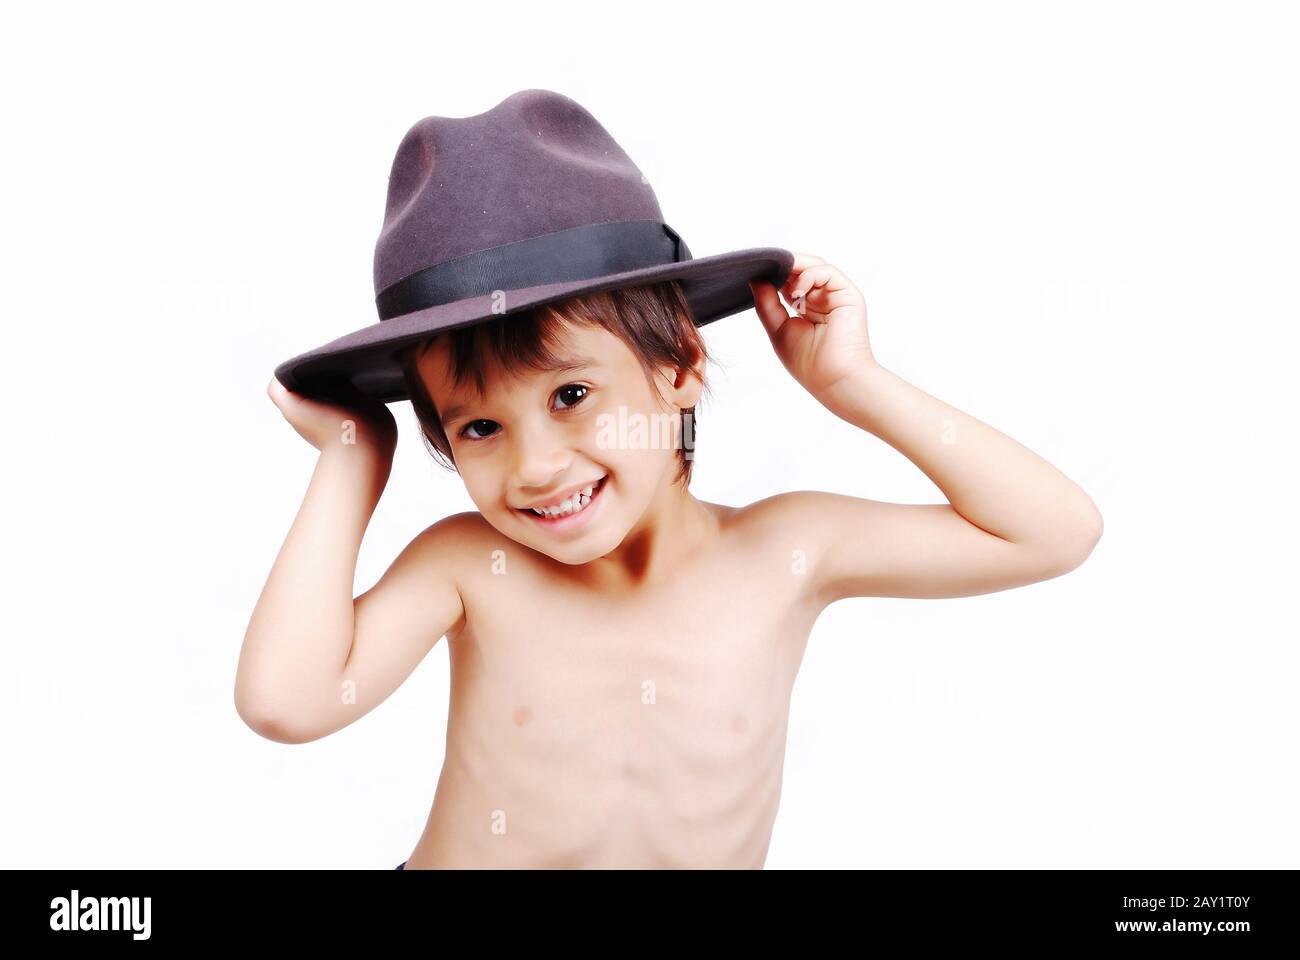 Boy with wheat hat on head Stock Photo